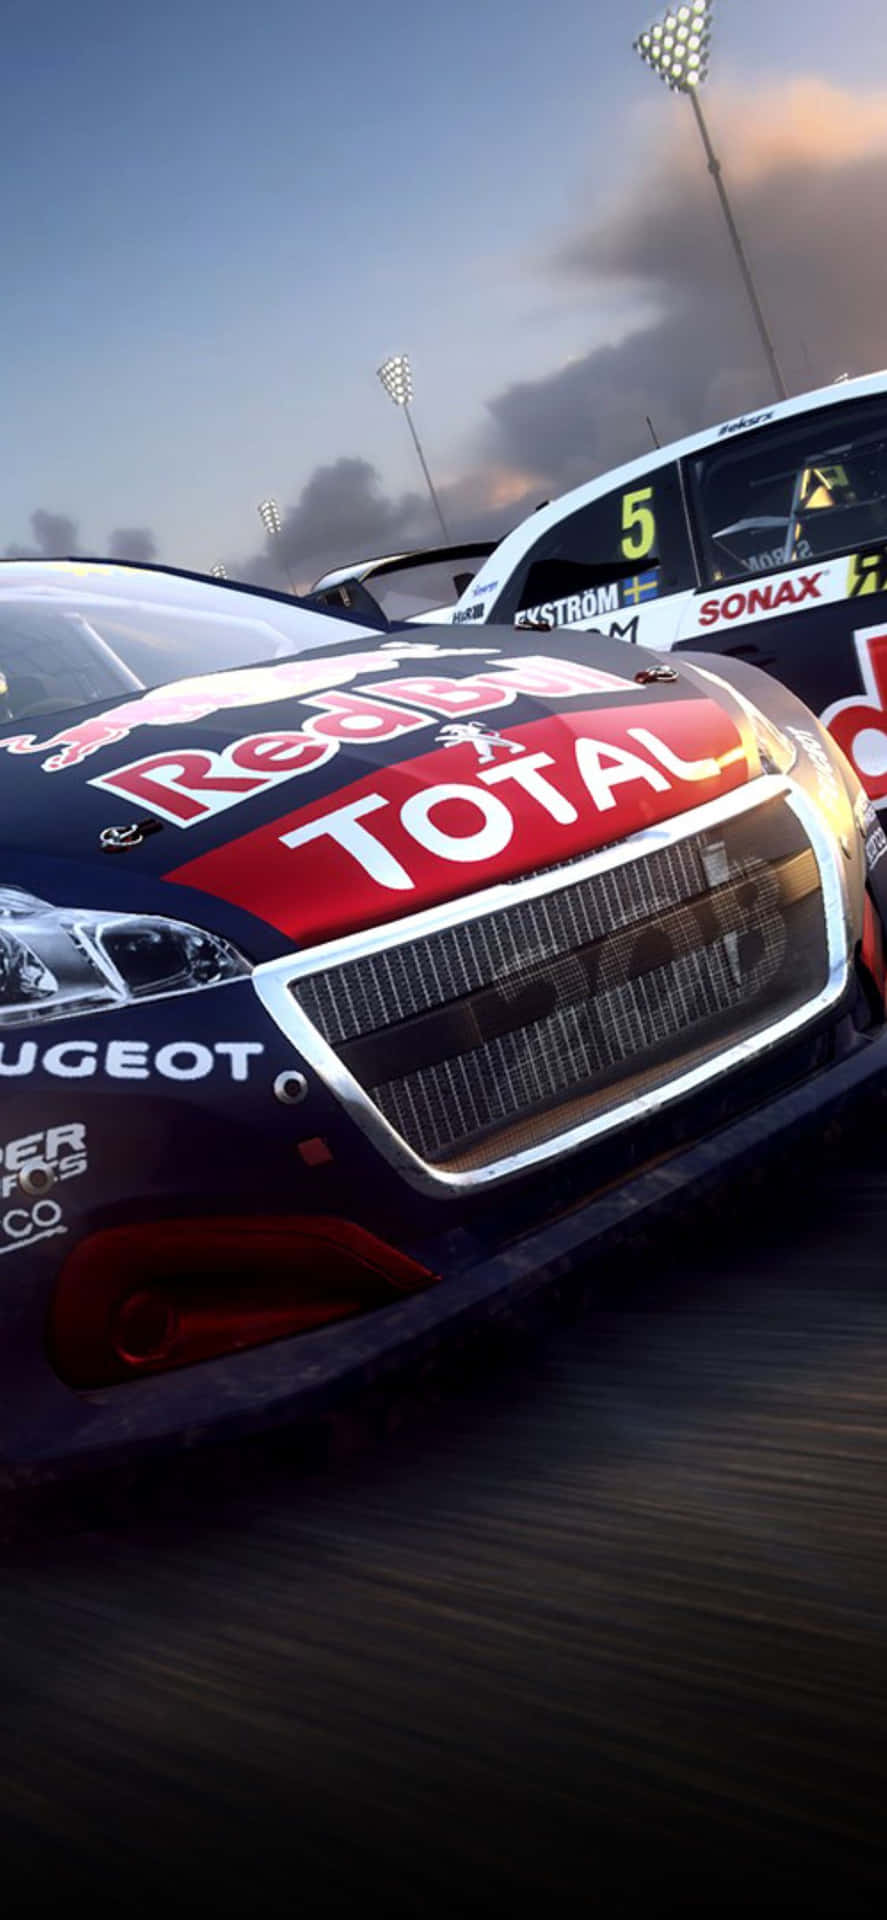 "Unveil the power of an Iphone X in Dirt Rally!"